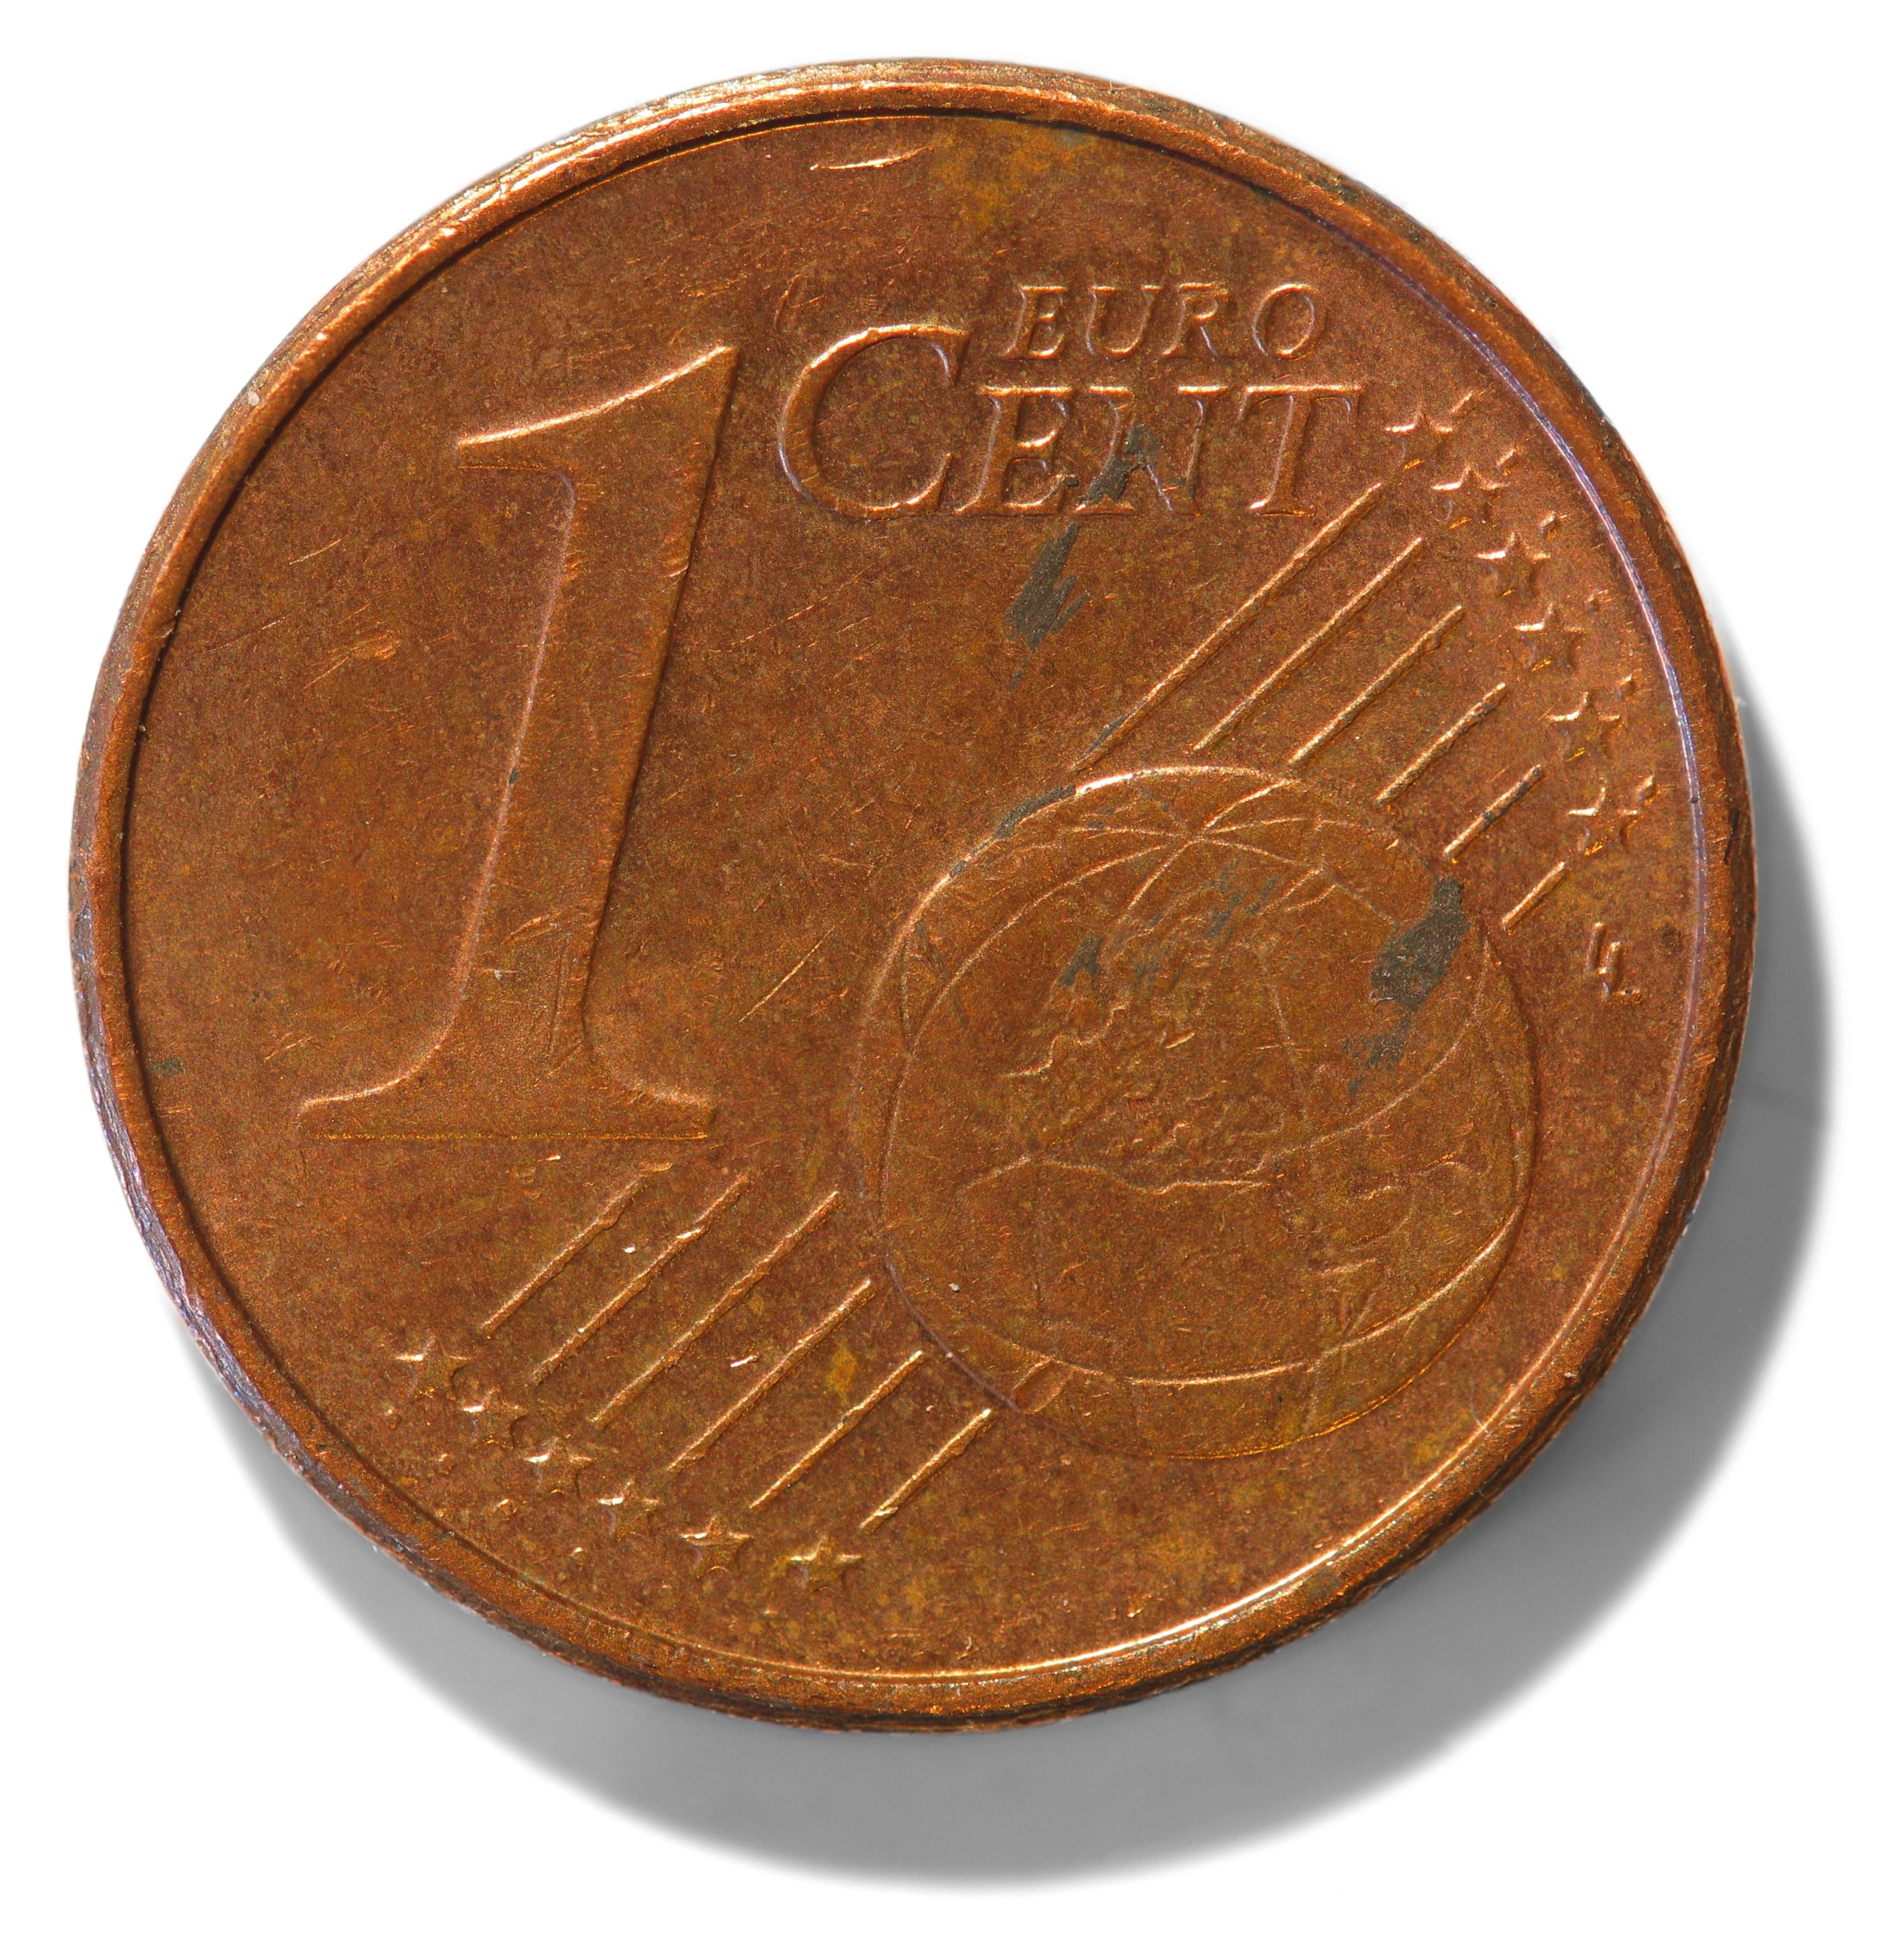 2002-issue Euro cent obverse